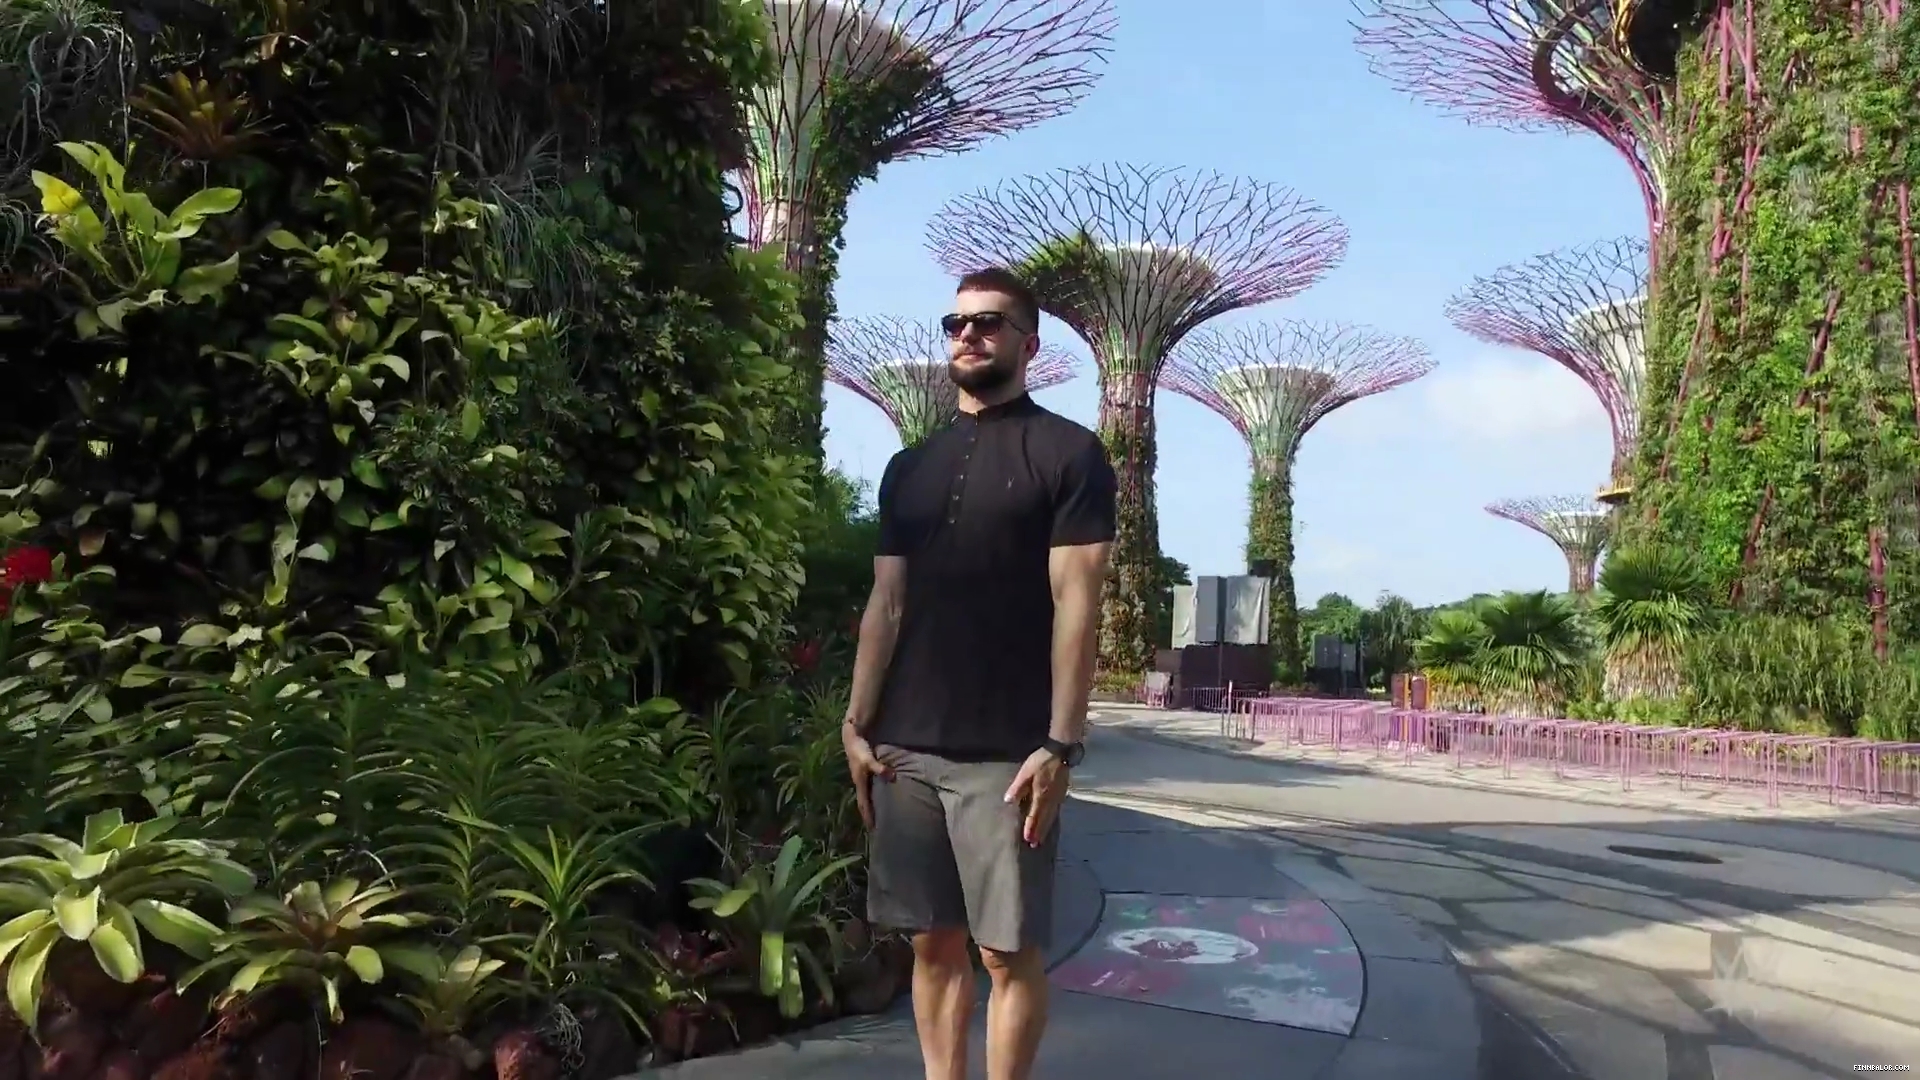 Finn_Balor_feels_like_he_is_in__Star_Wars__while_touring_Singapore_s_Supertree__mp40000.jpg